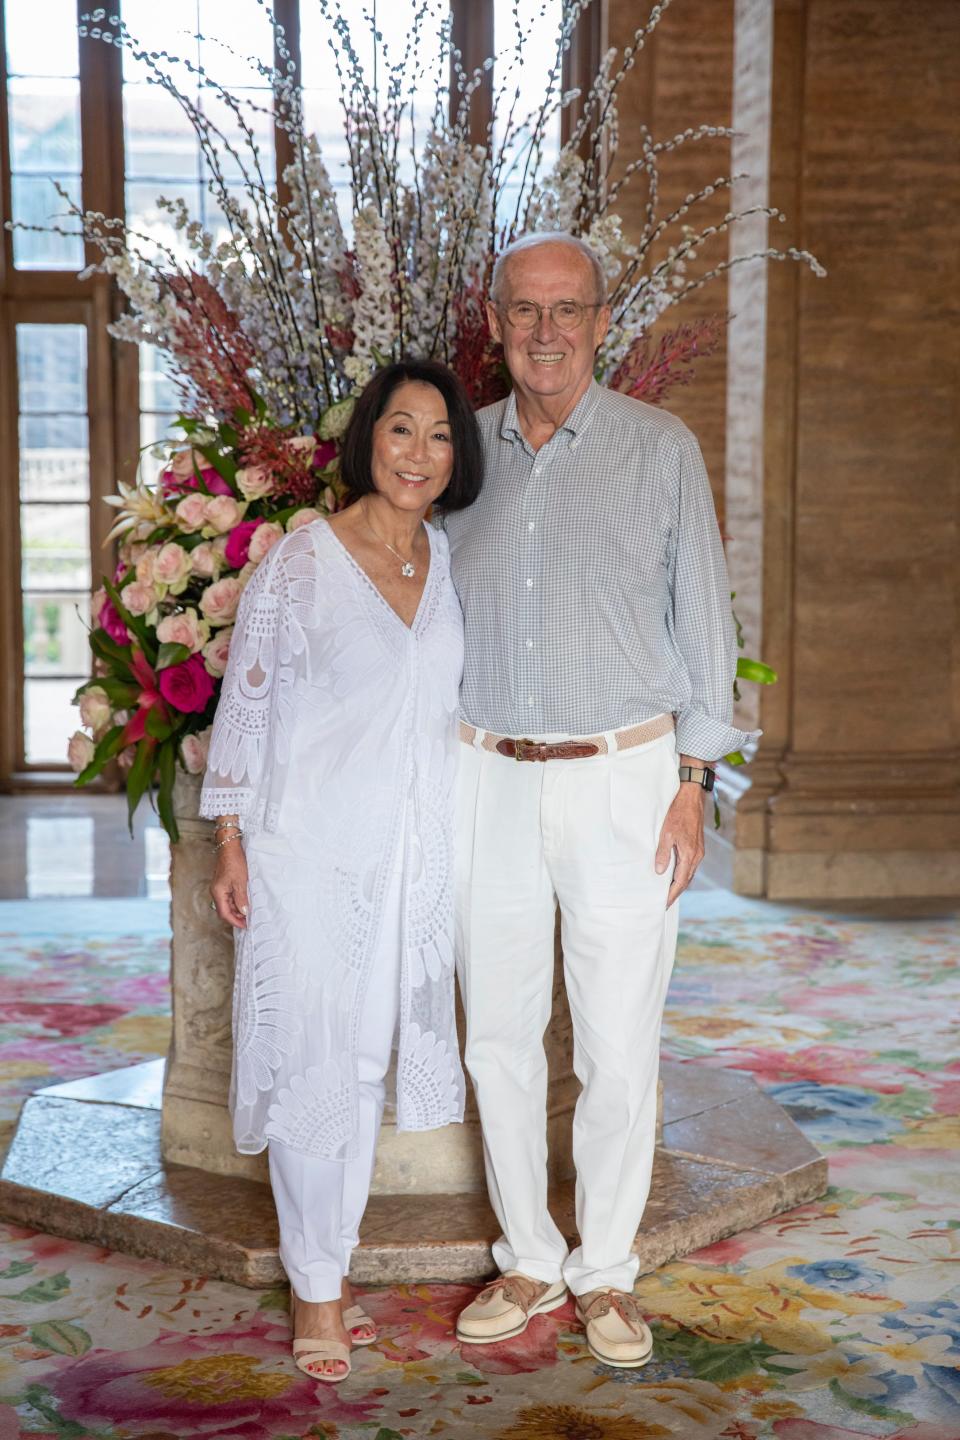 Patricia and Jon Stout bought their Beach Point condo in early 2021 and then remodeled it.